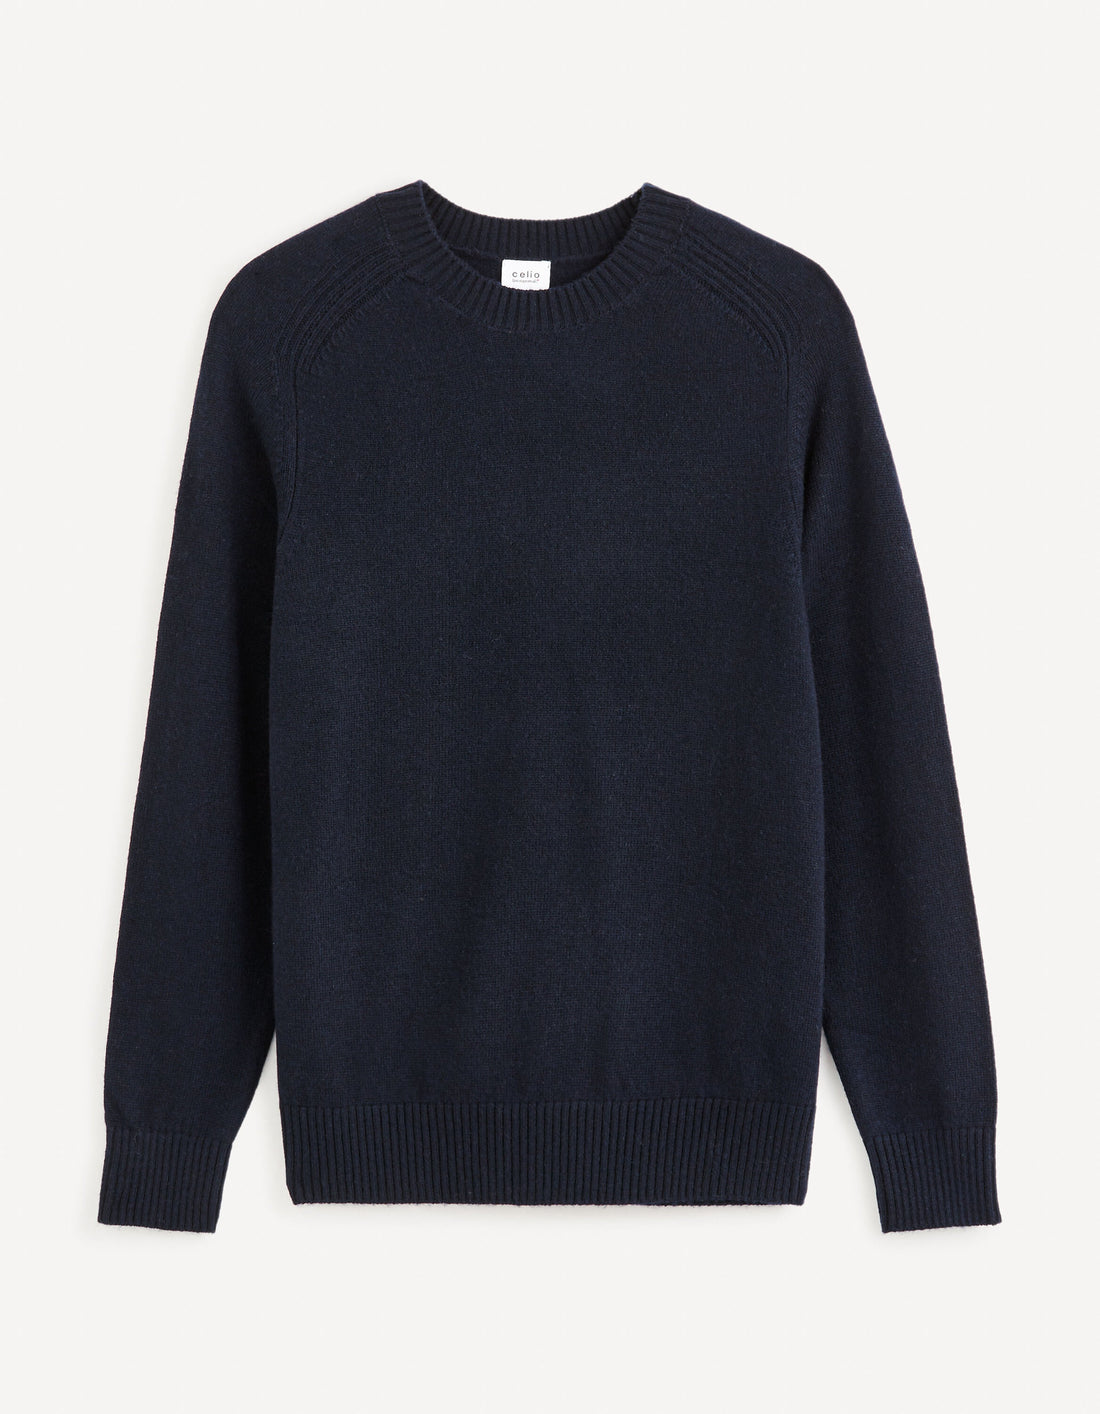 Round Neck Sweater 100% Lambswool - Navy_CEWOOL_ENCRE FONCE_02